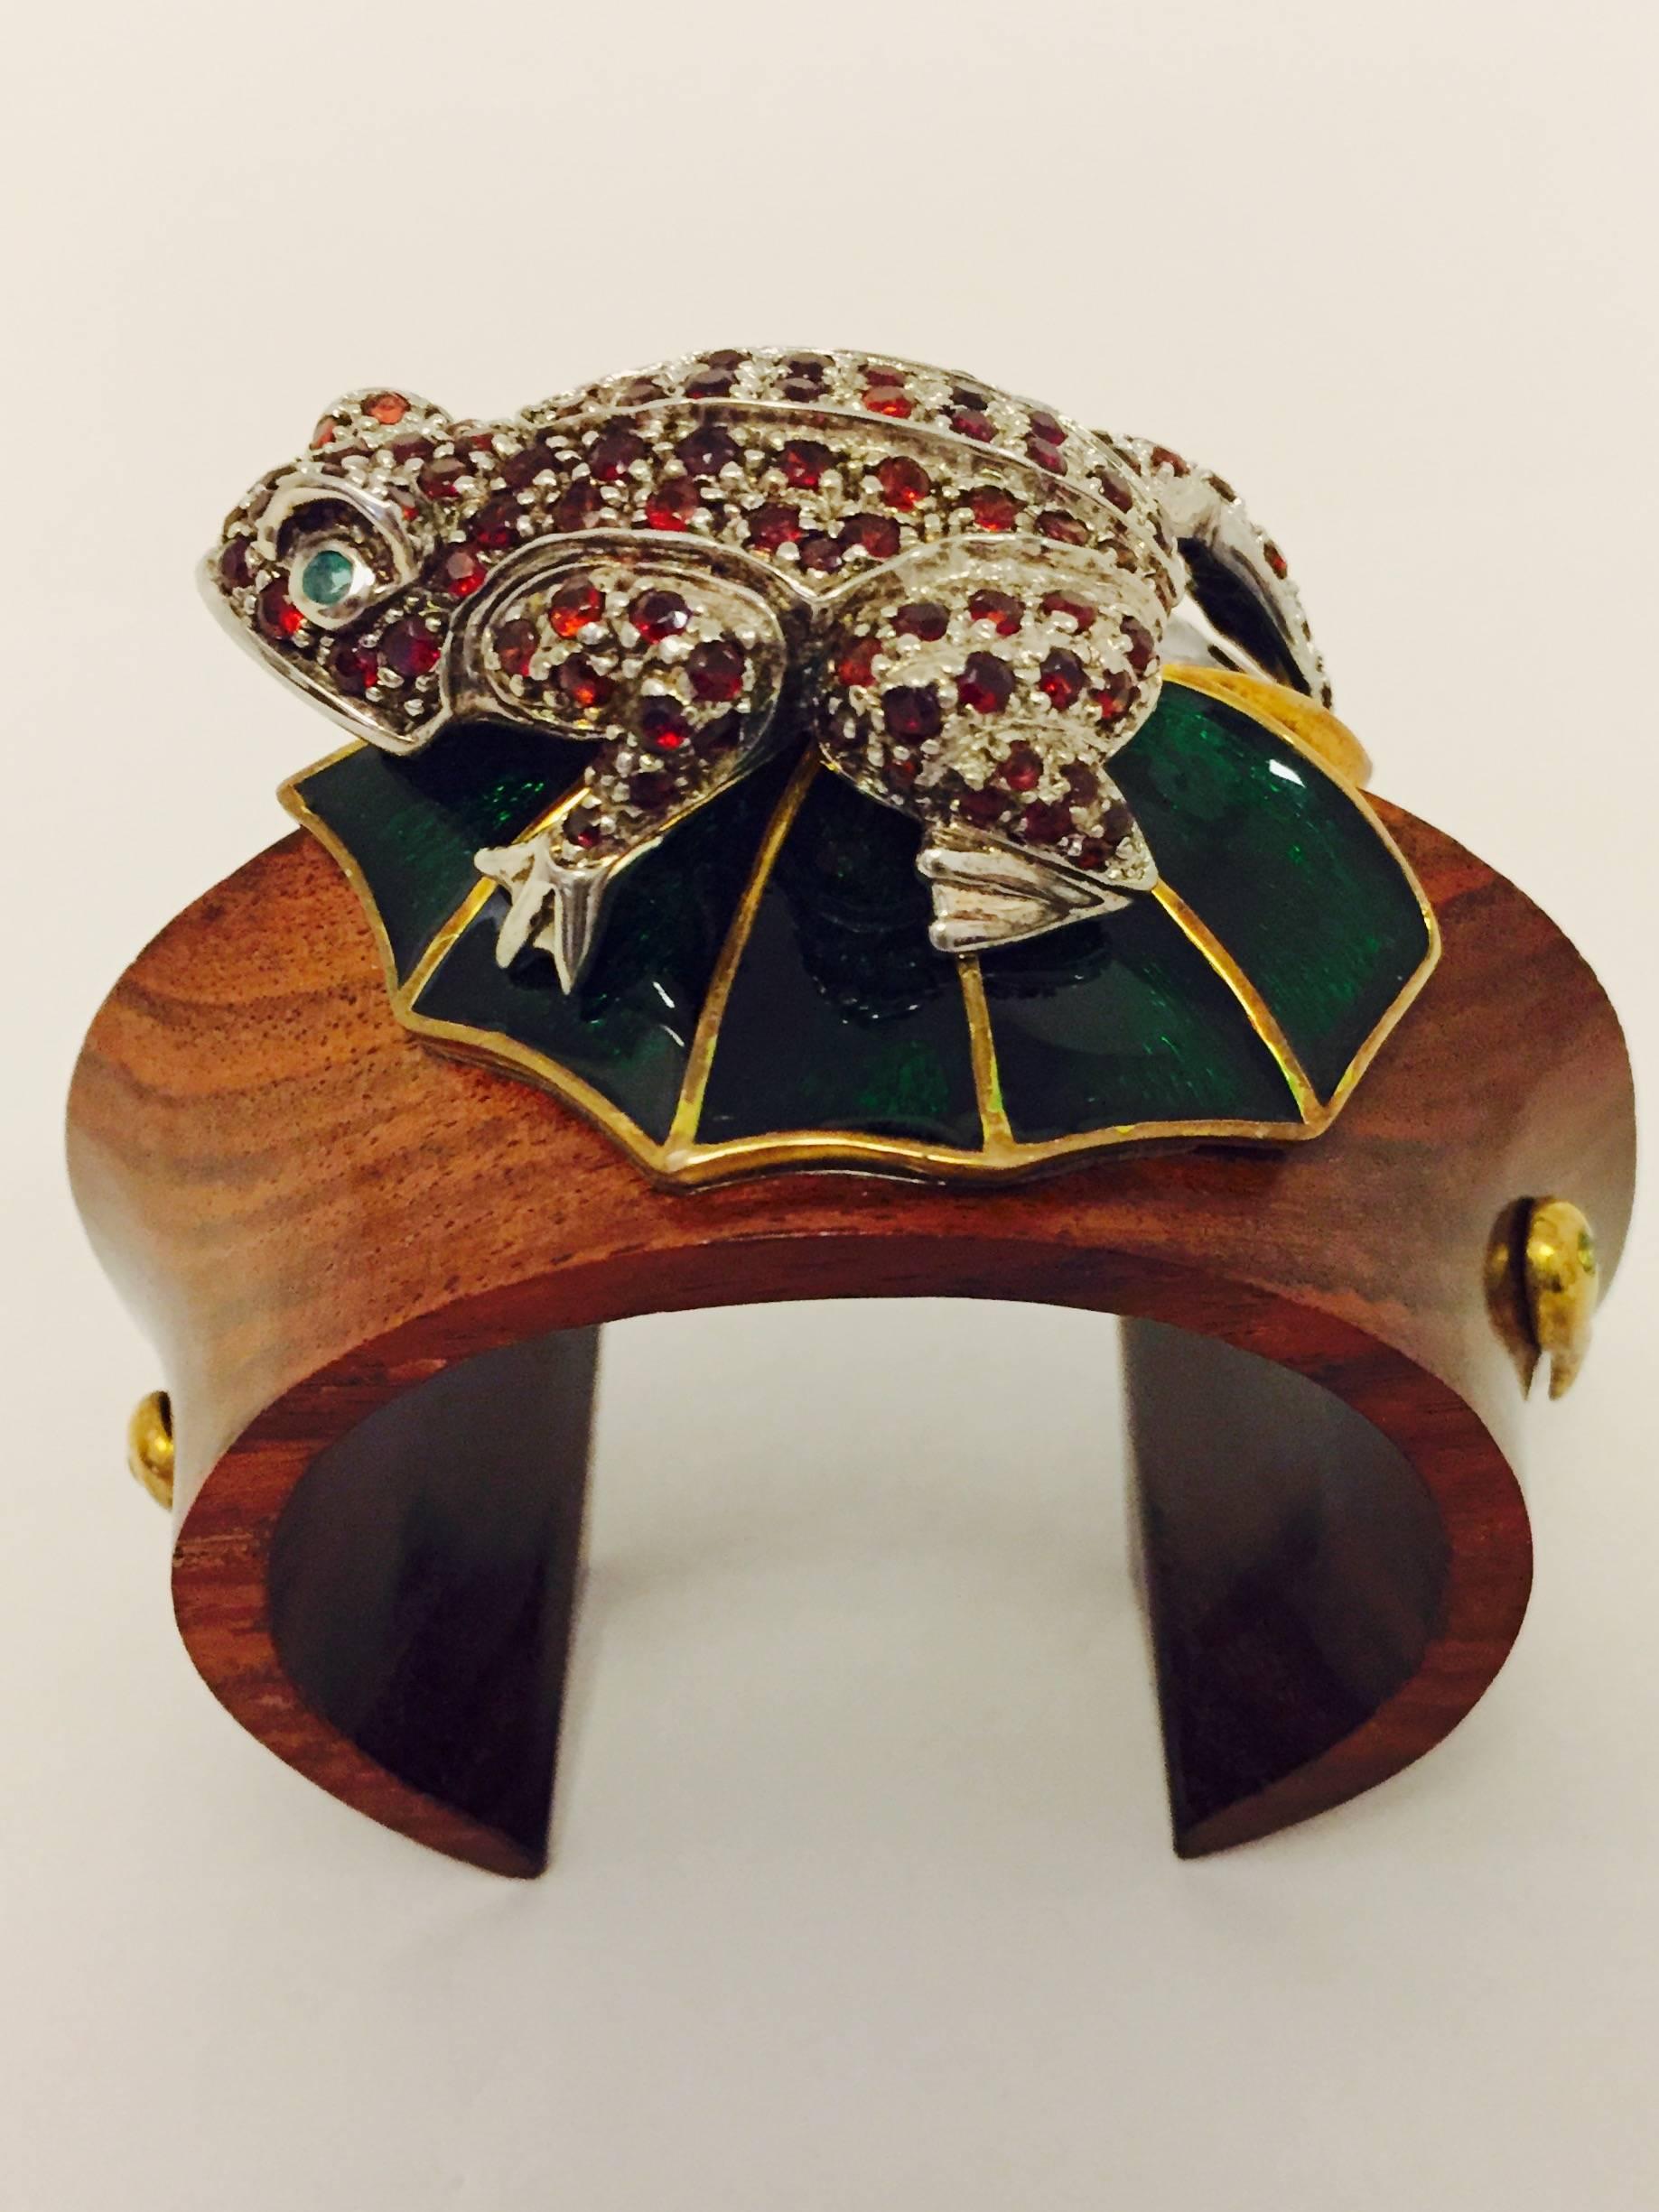 Contemporary Mahogany Wood Cuff with Crystal Covered Frog on Enamel Lily Pad